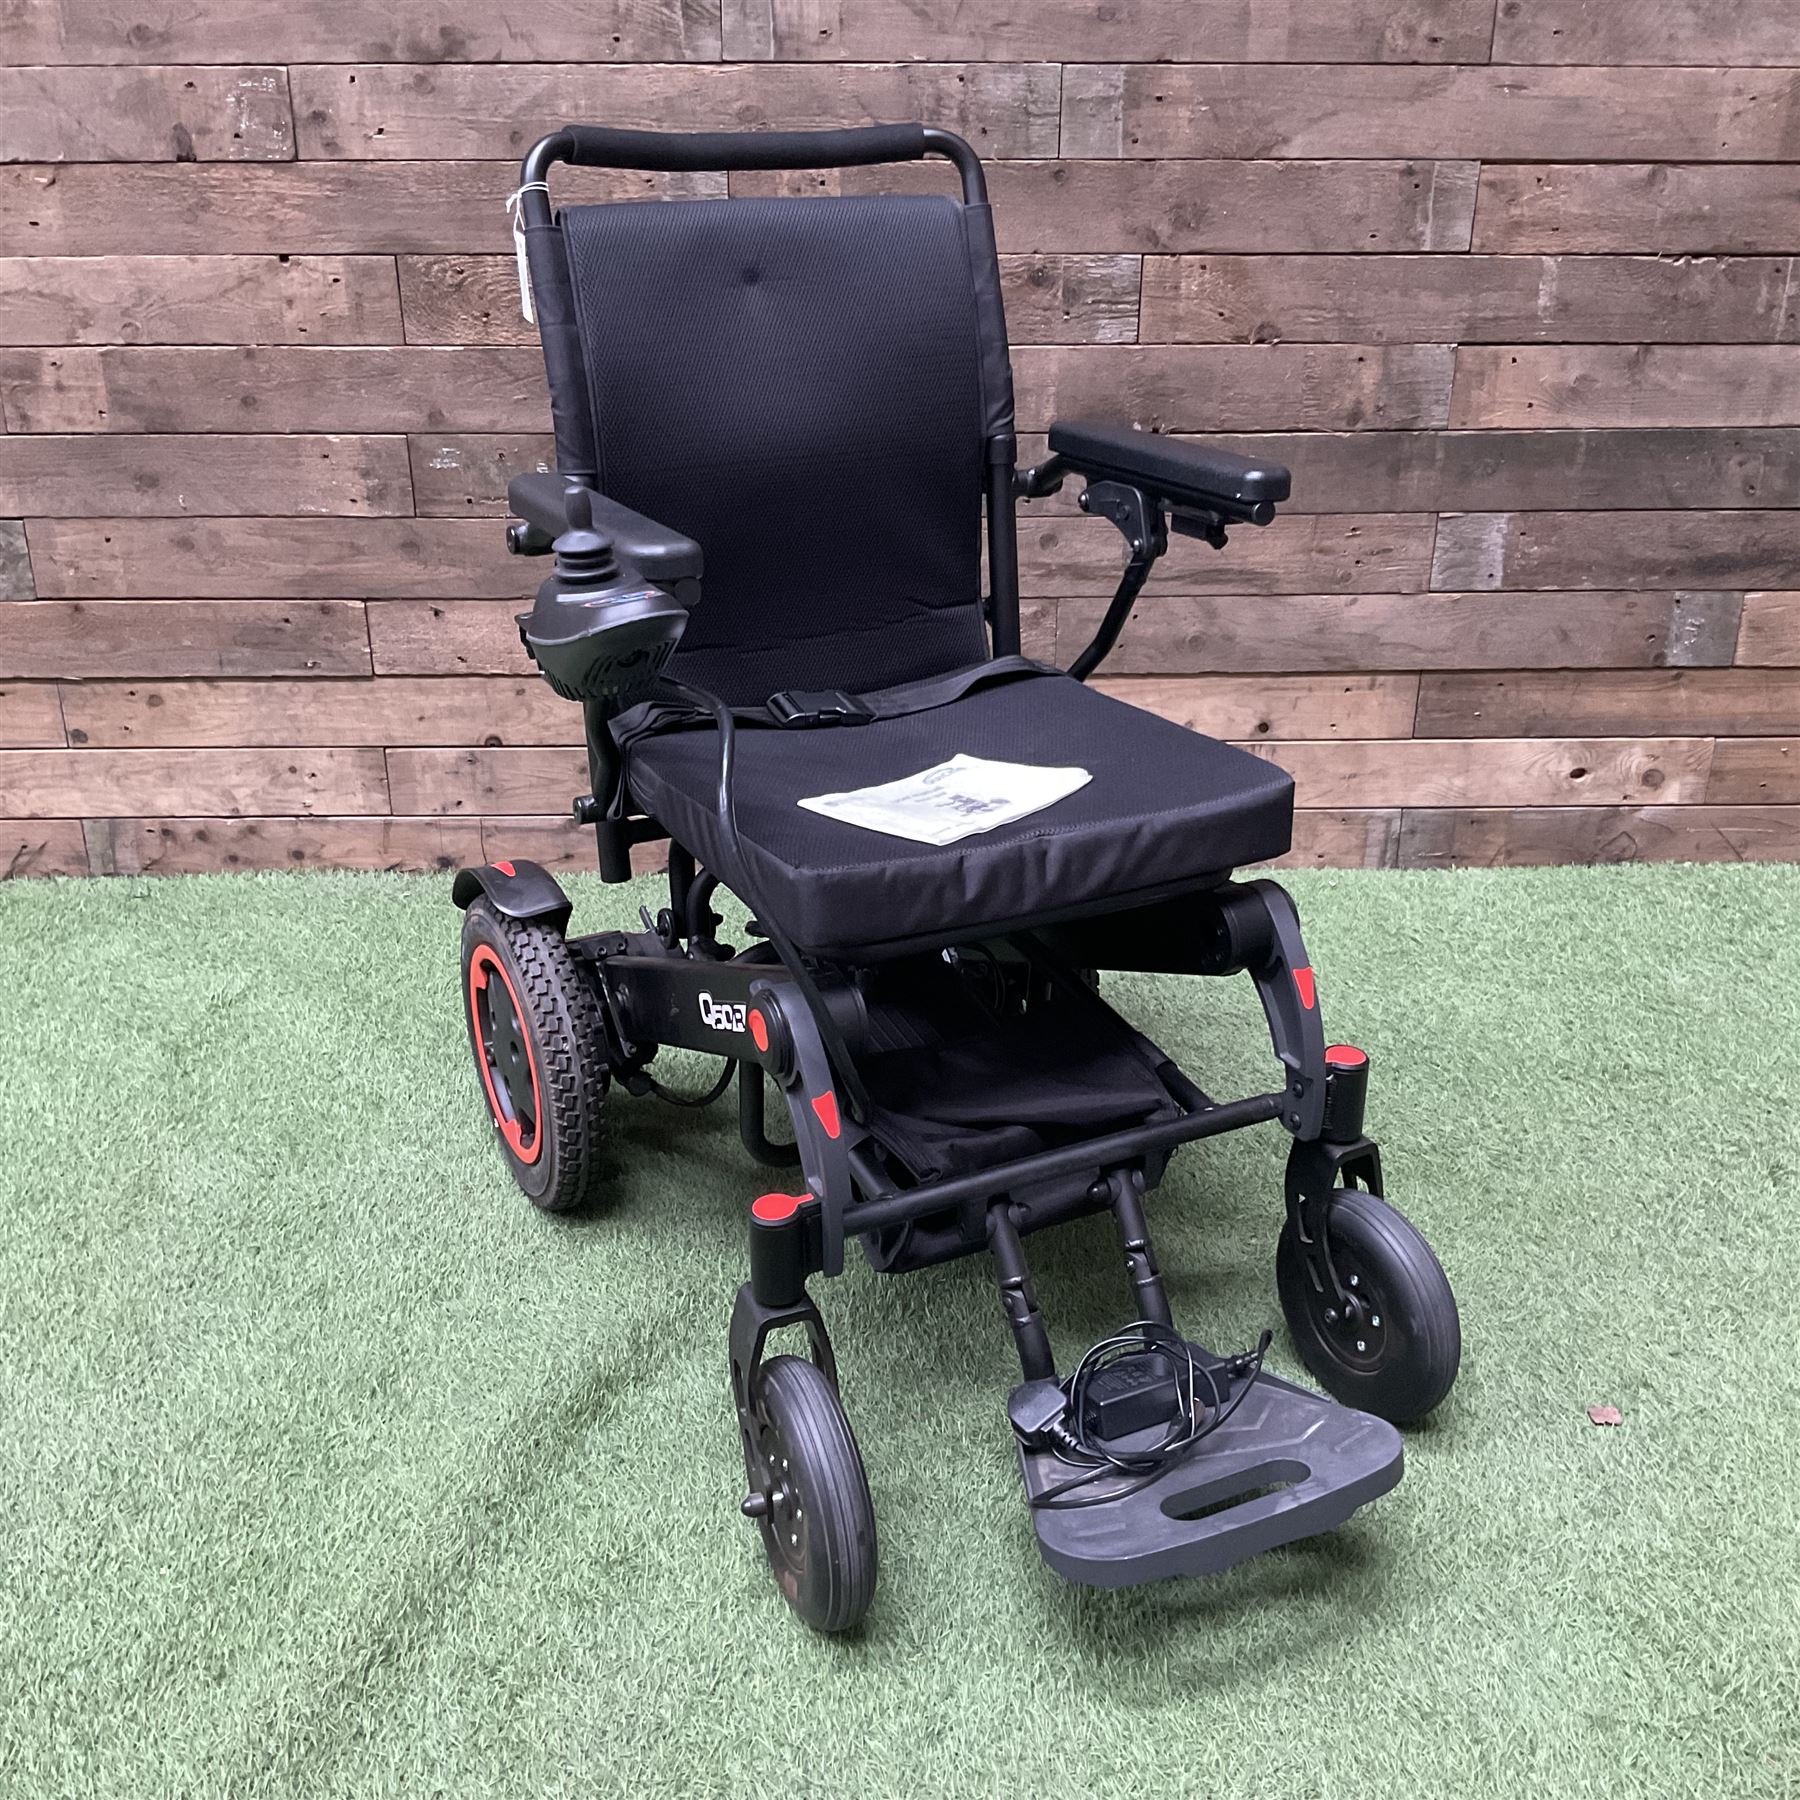 Sunrise Quickie Q50R electric mobility wheelchair - Image 2 of 5